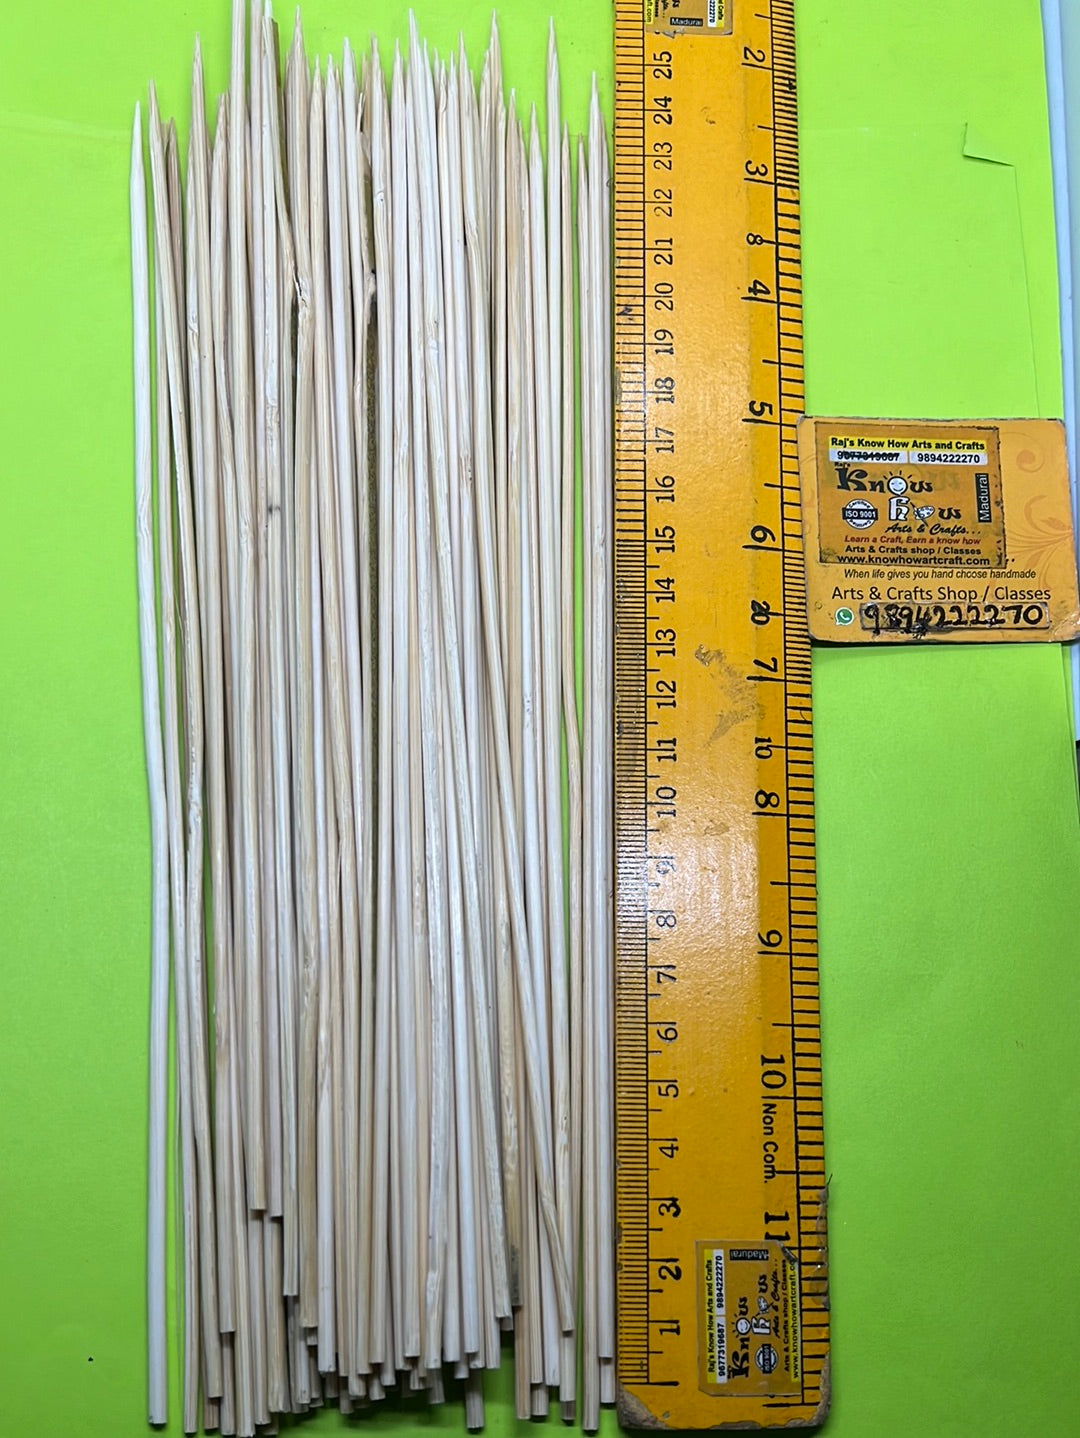 Bamboo skewers for wooden sticks 2